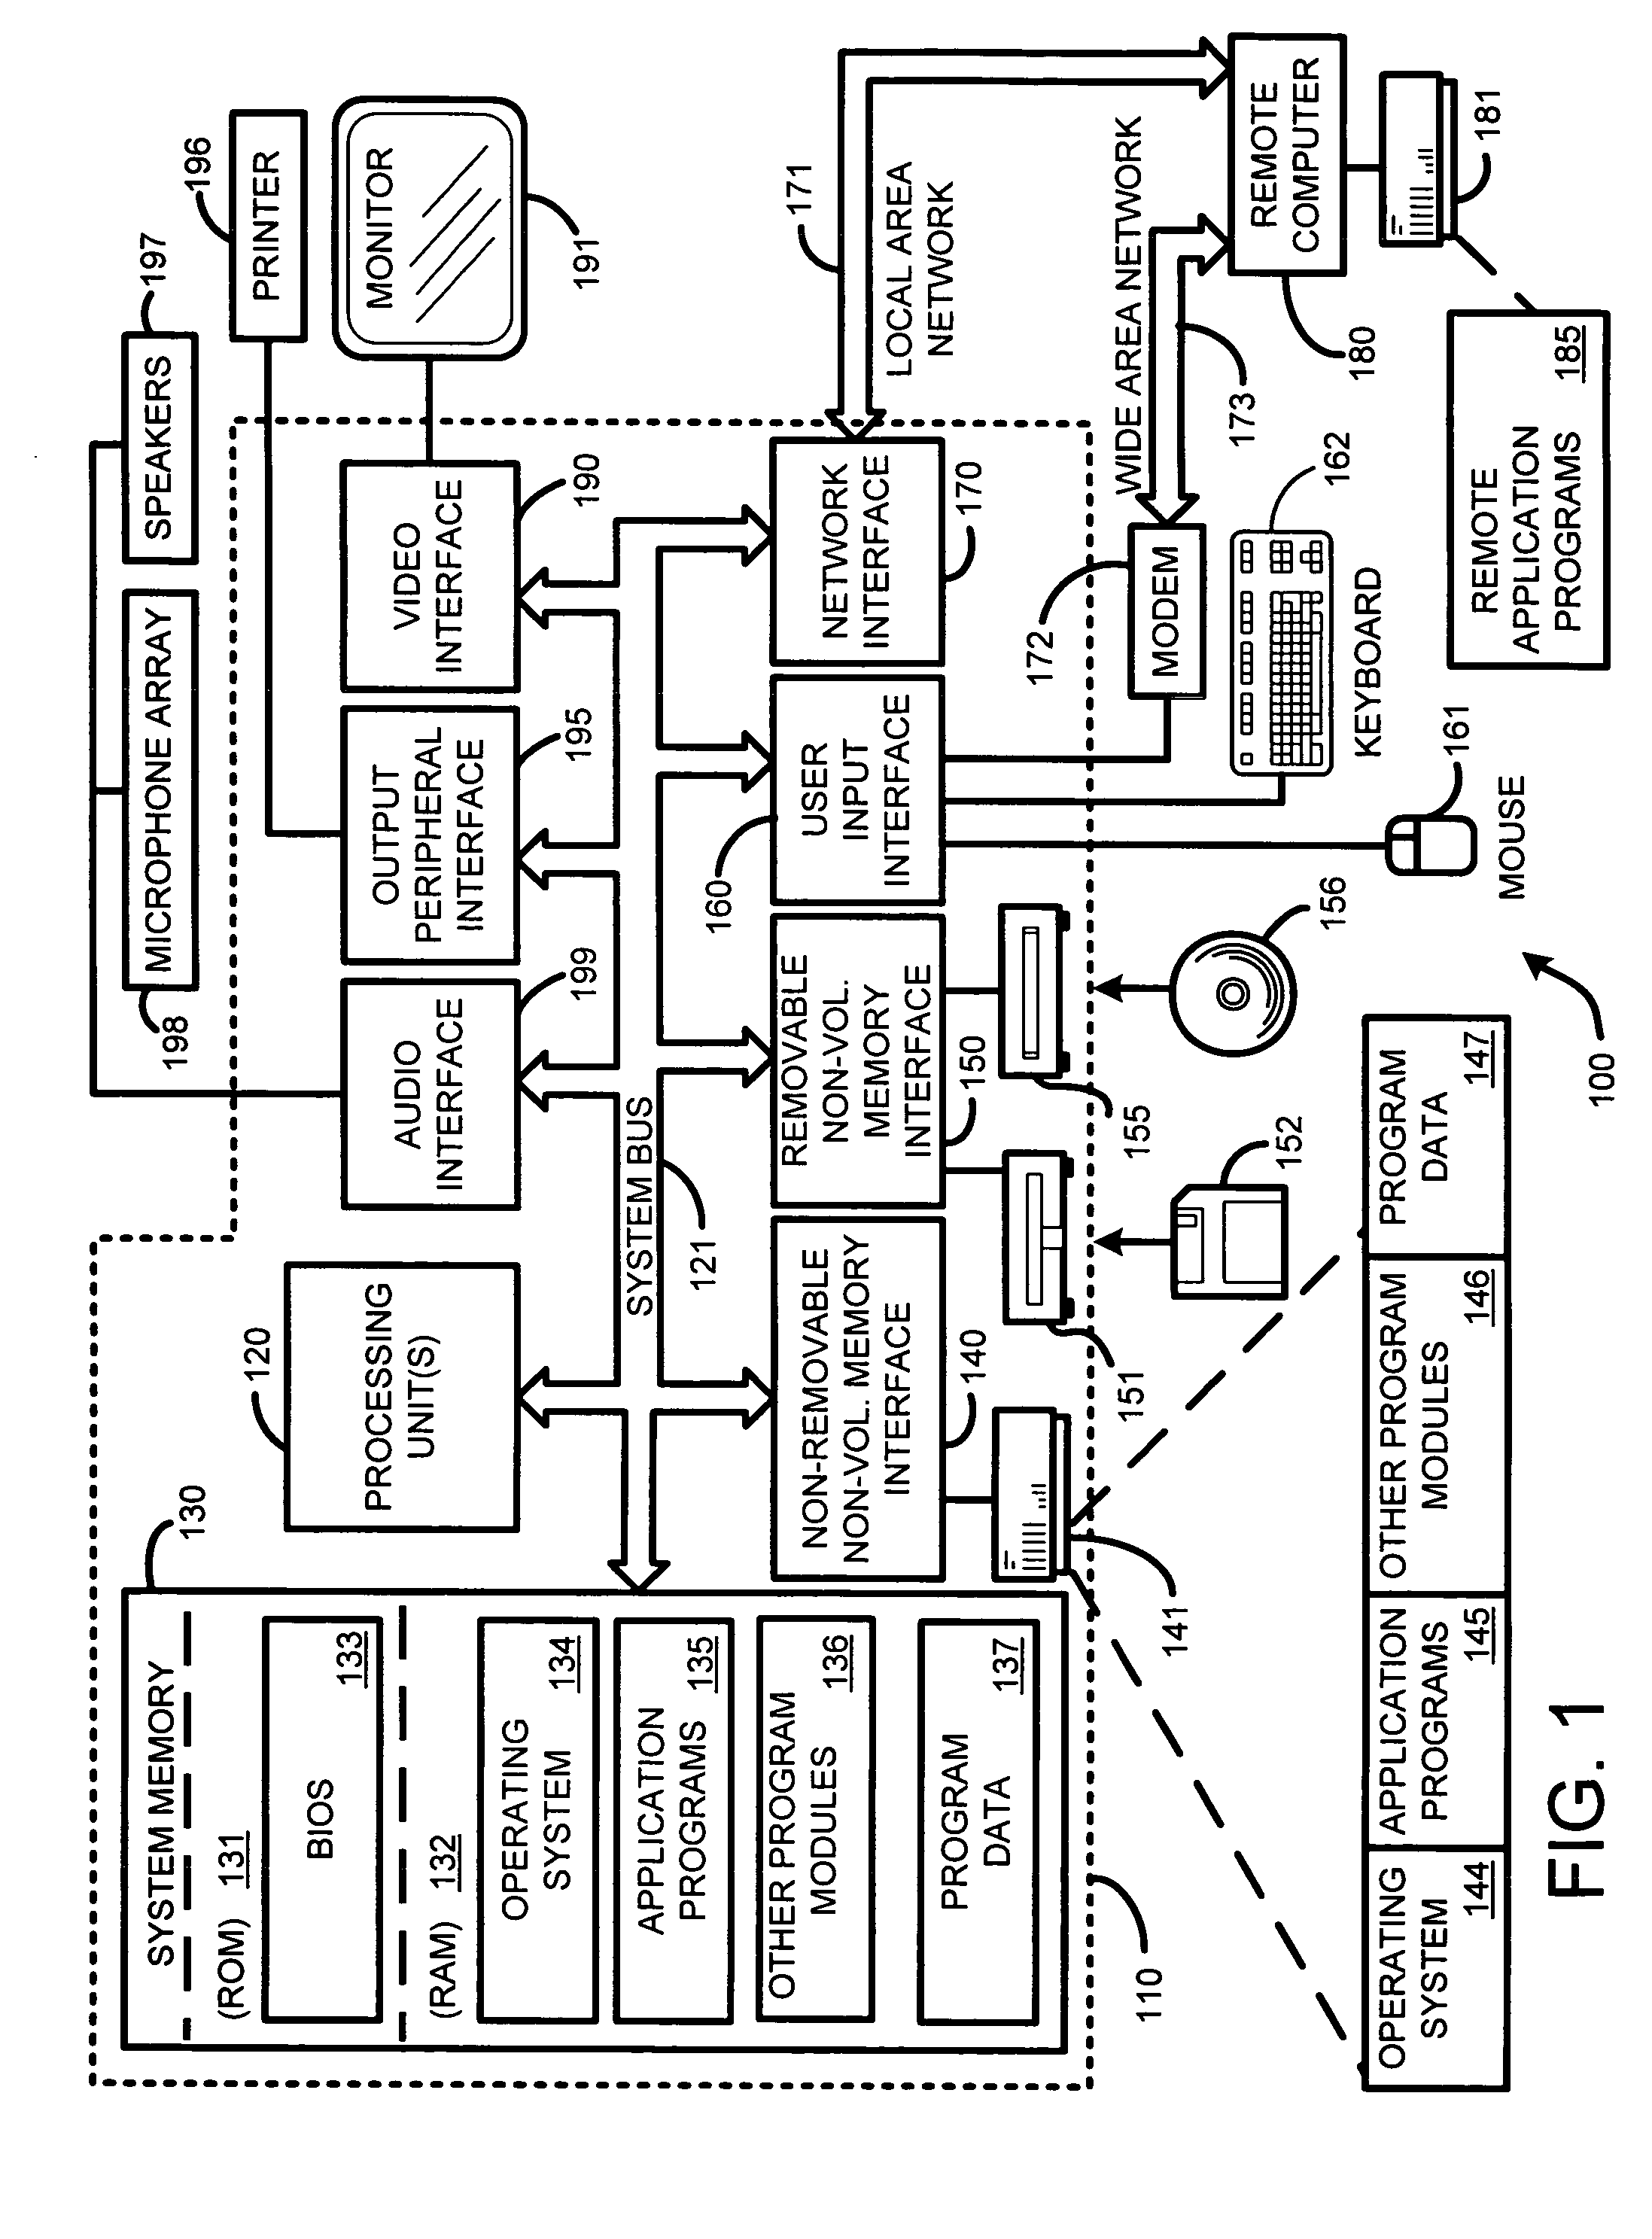 System and method for improving the precision of localization estimates